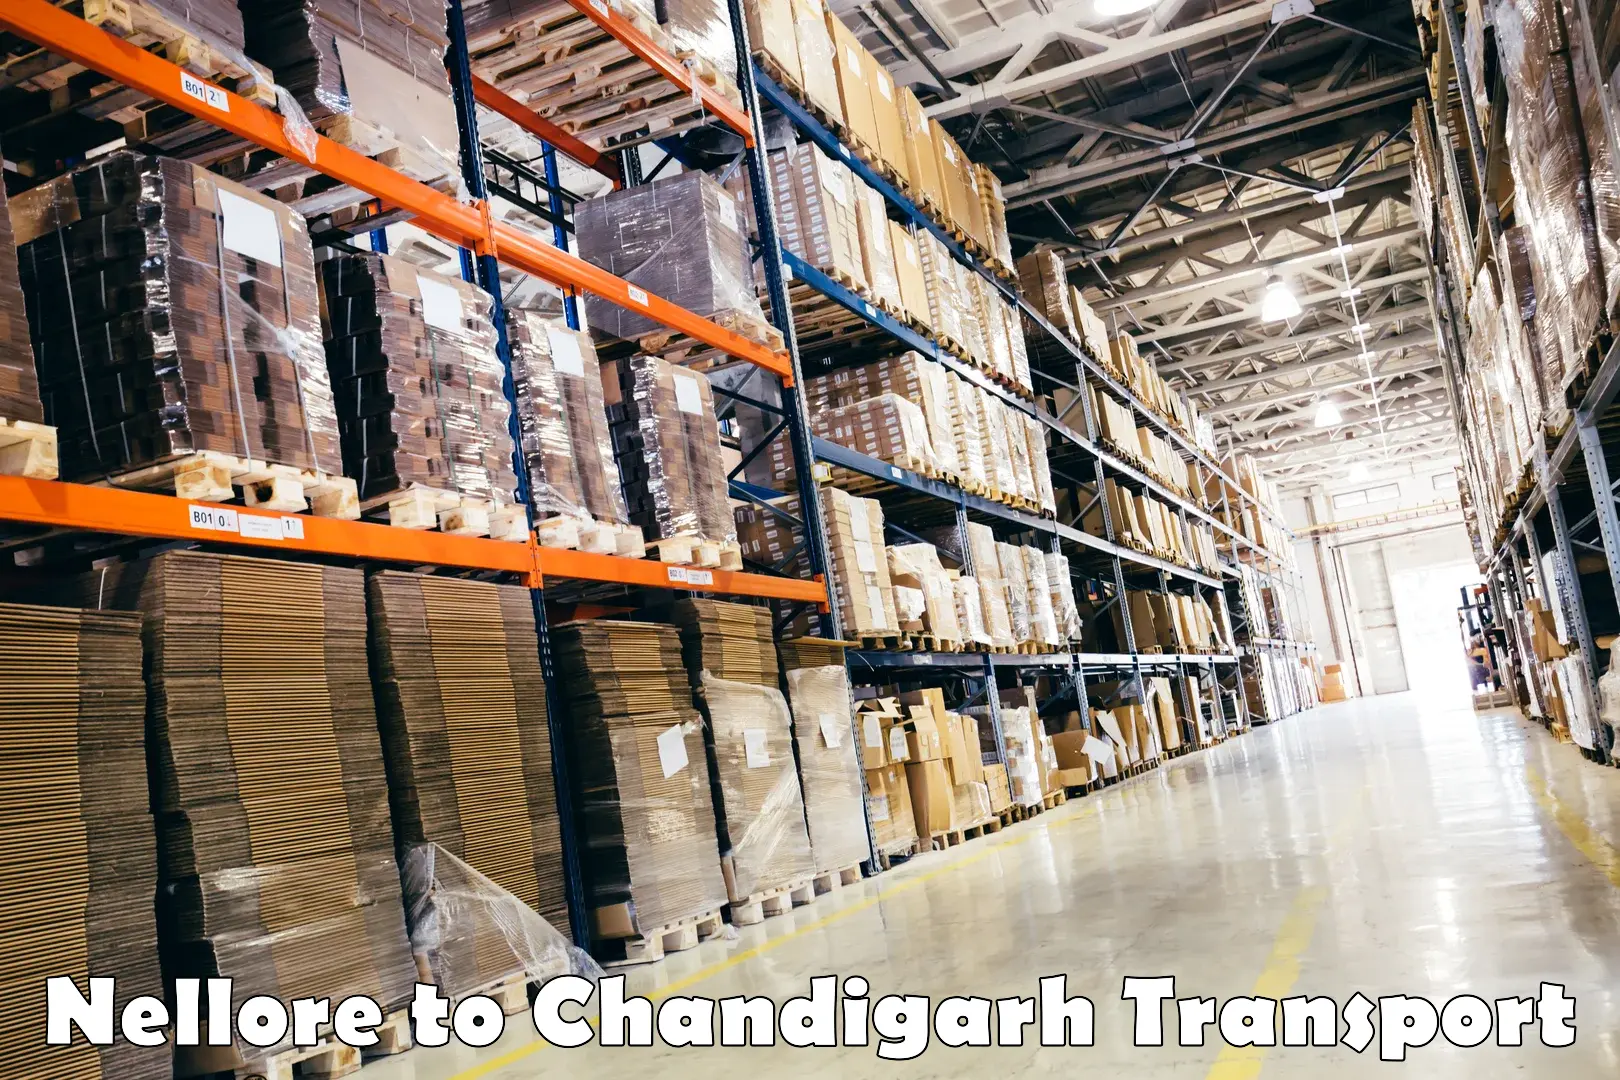 Container transport service Nellore to Chandigarh